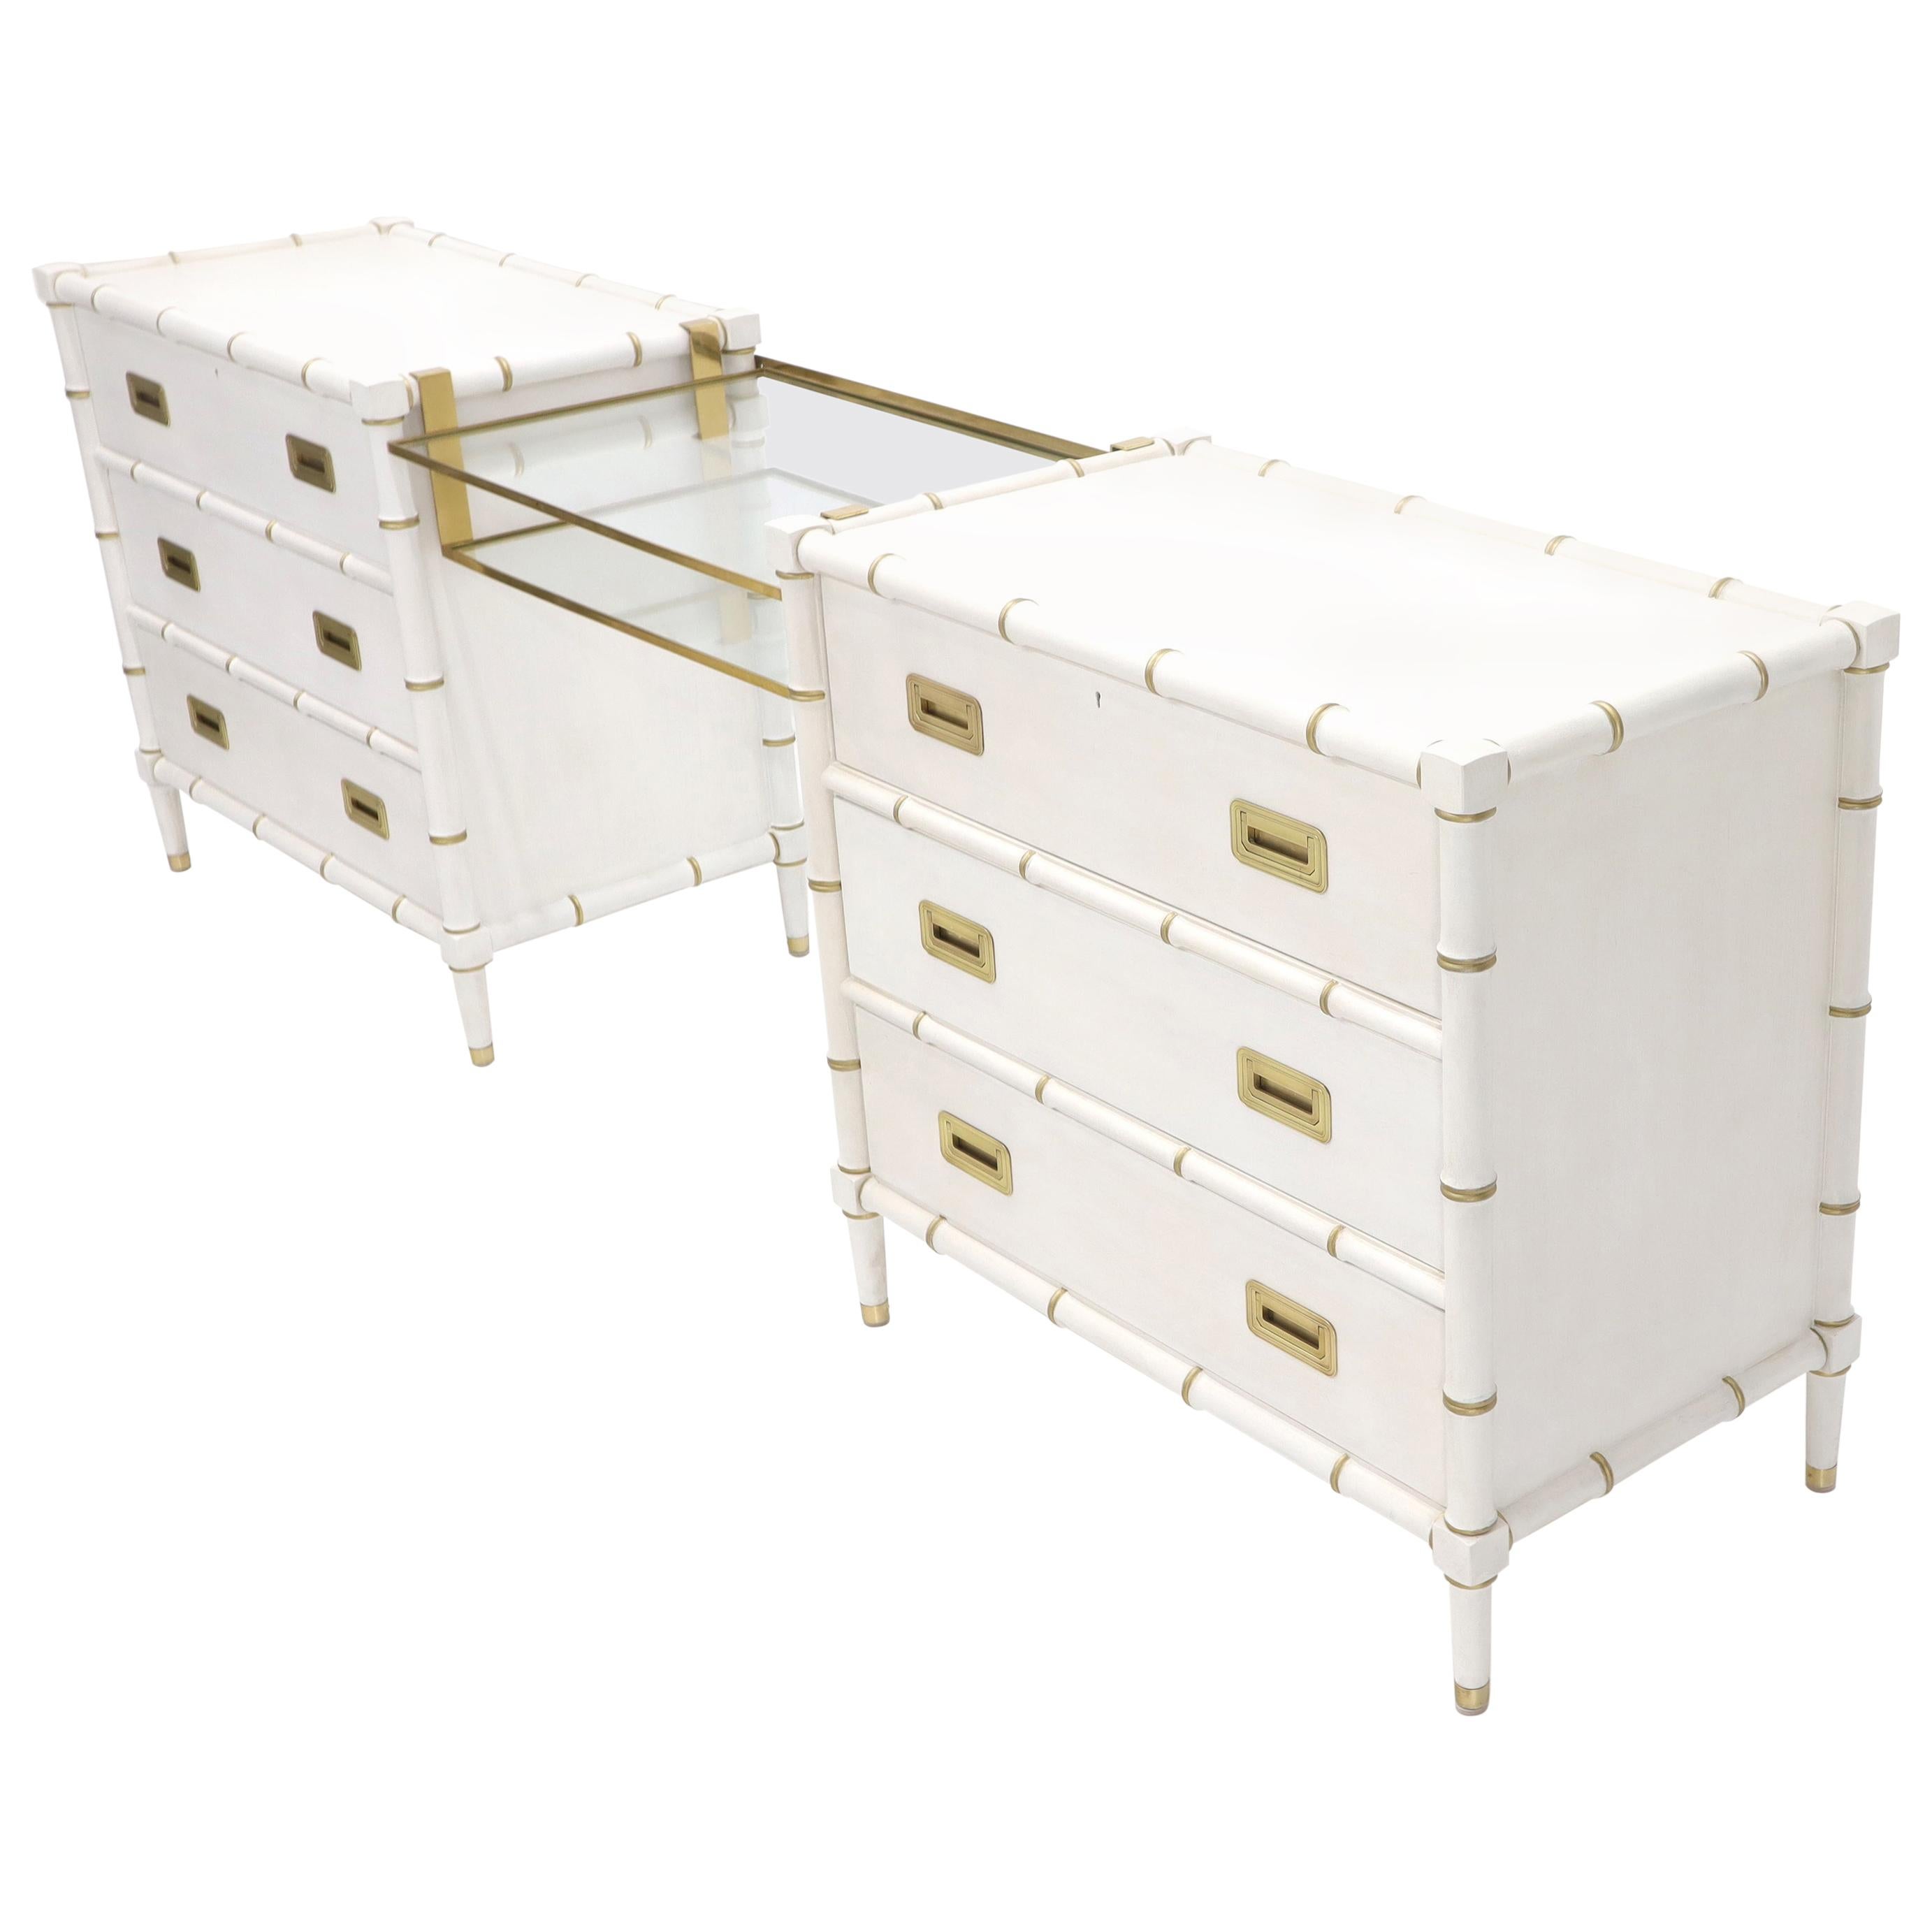 Pair of White Lacquer Brass Hardware Bachelor Chest with Suspended Brass Vanity